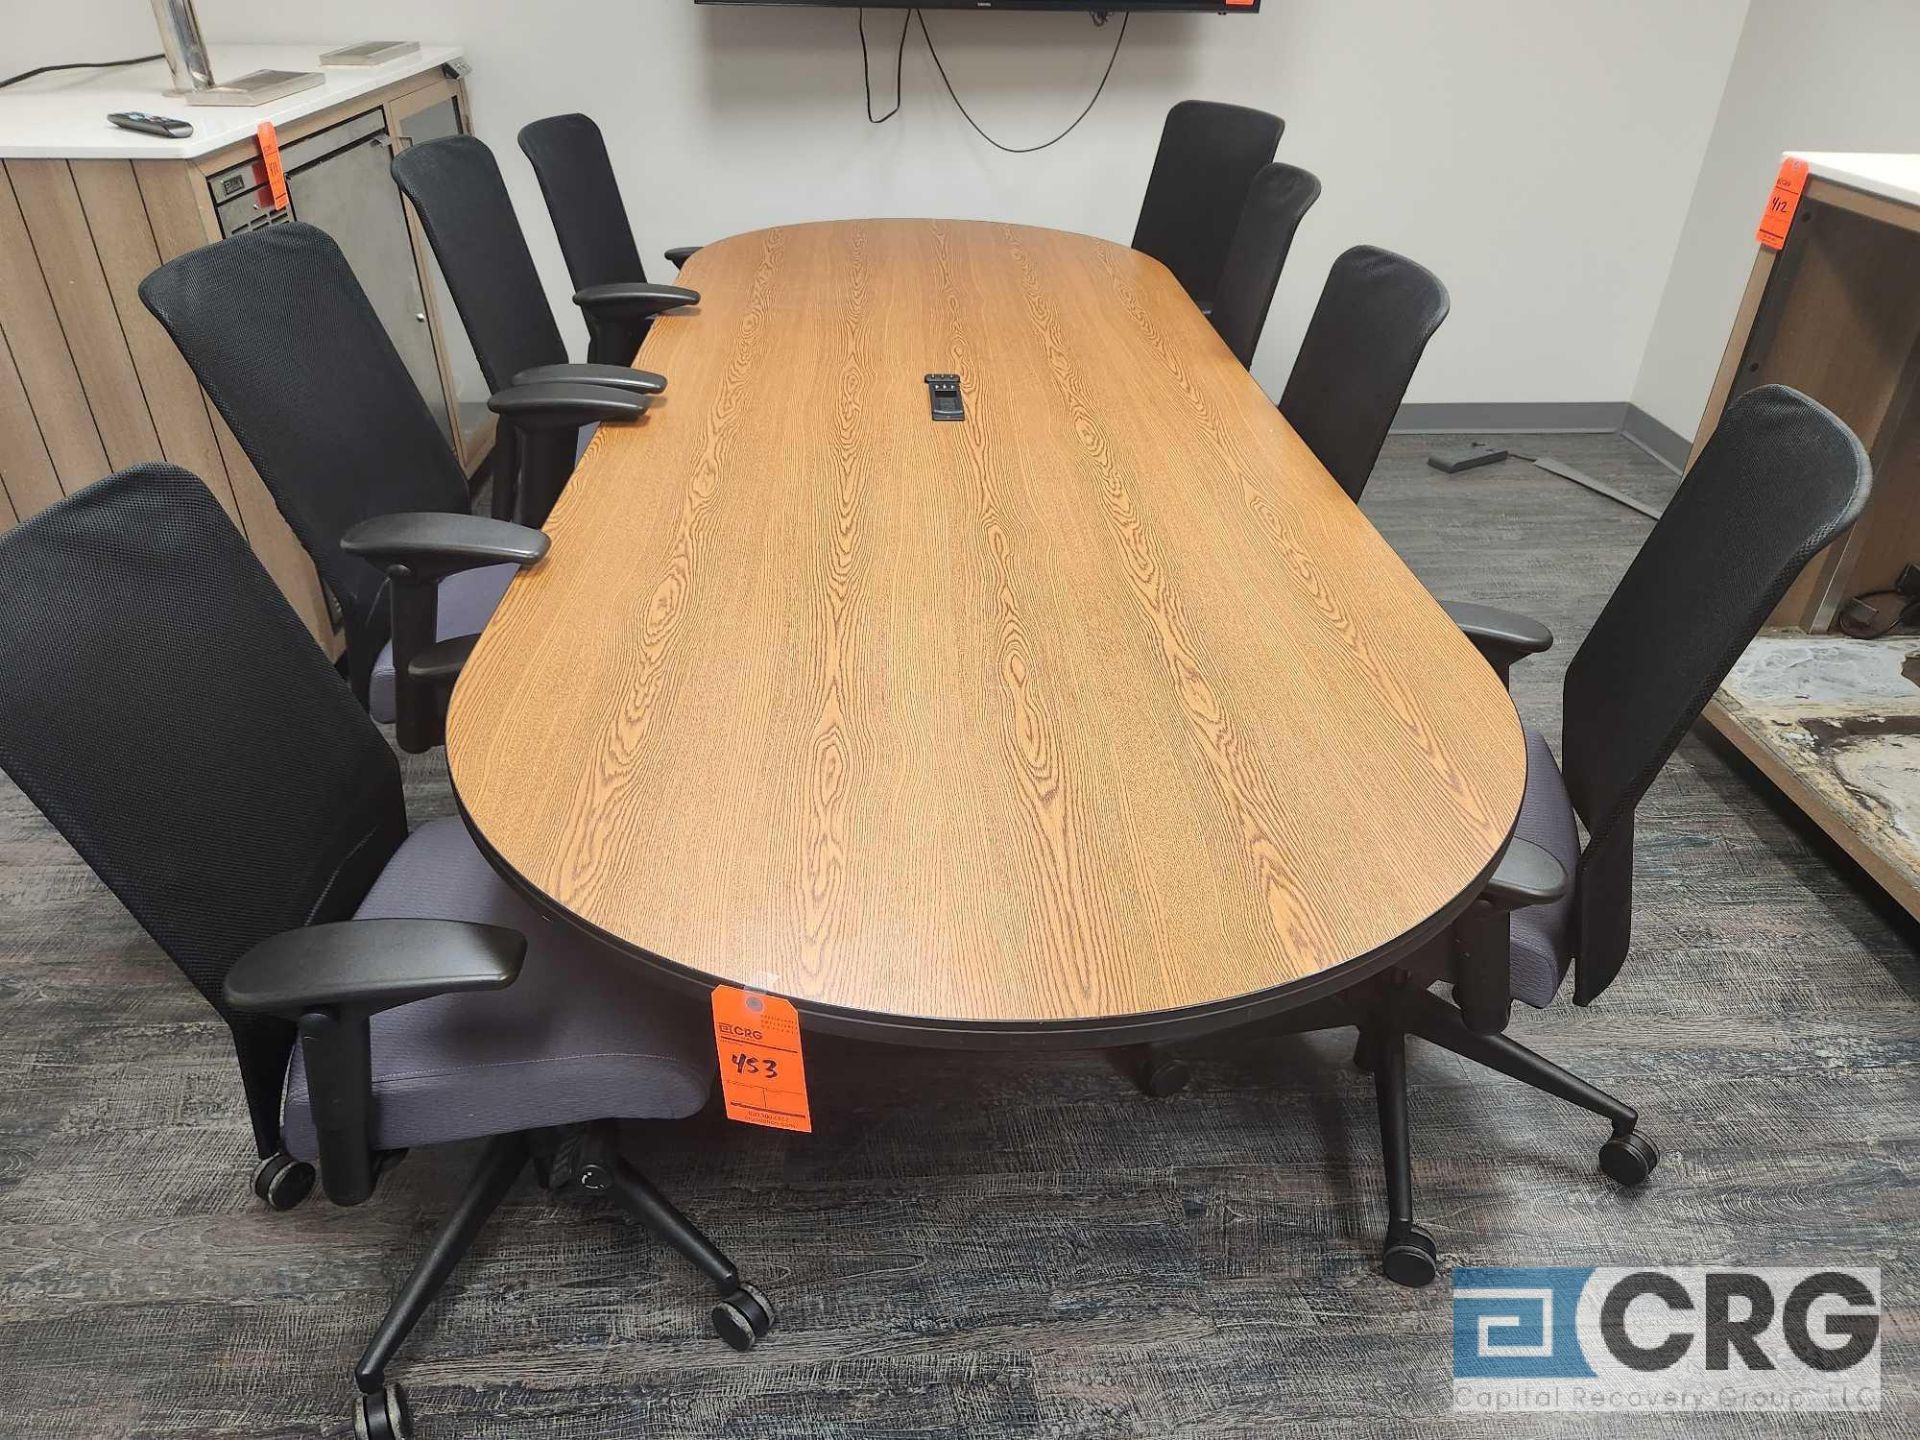 8 ft Wood Conference Table and Executive Chairs - Image 2 of 3